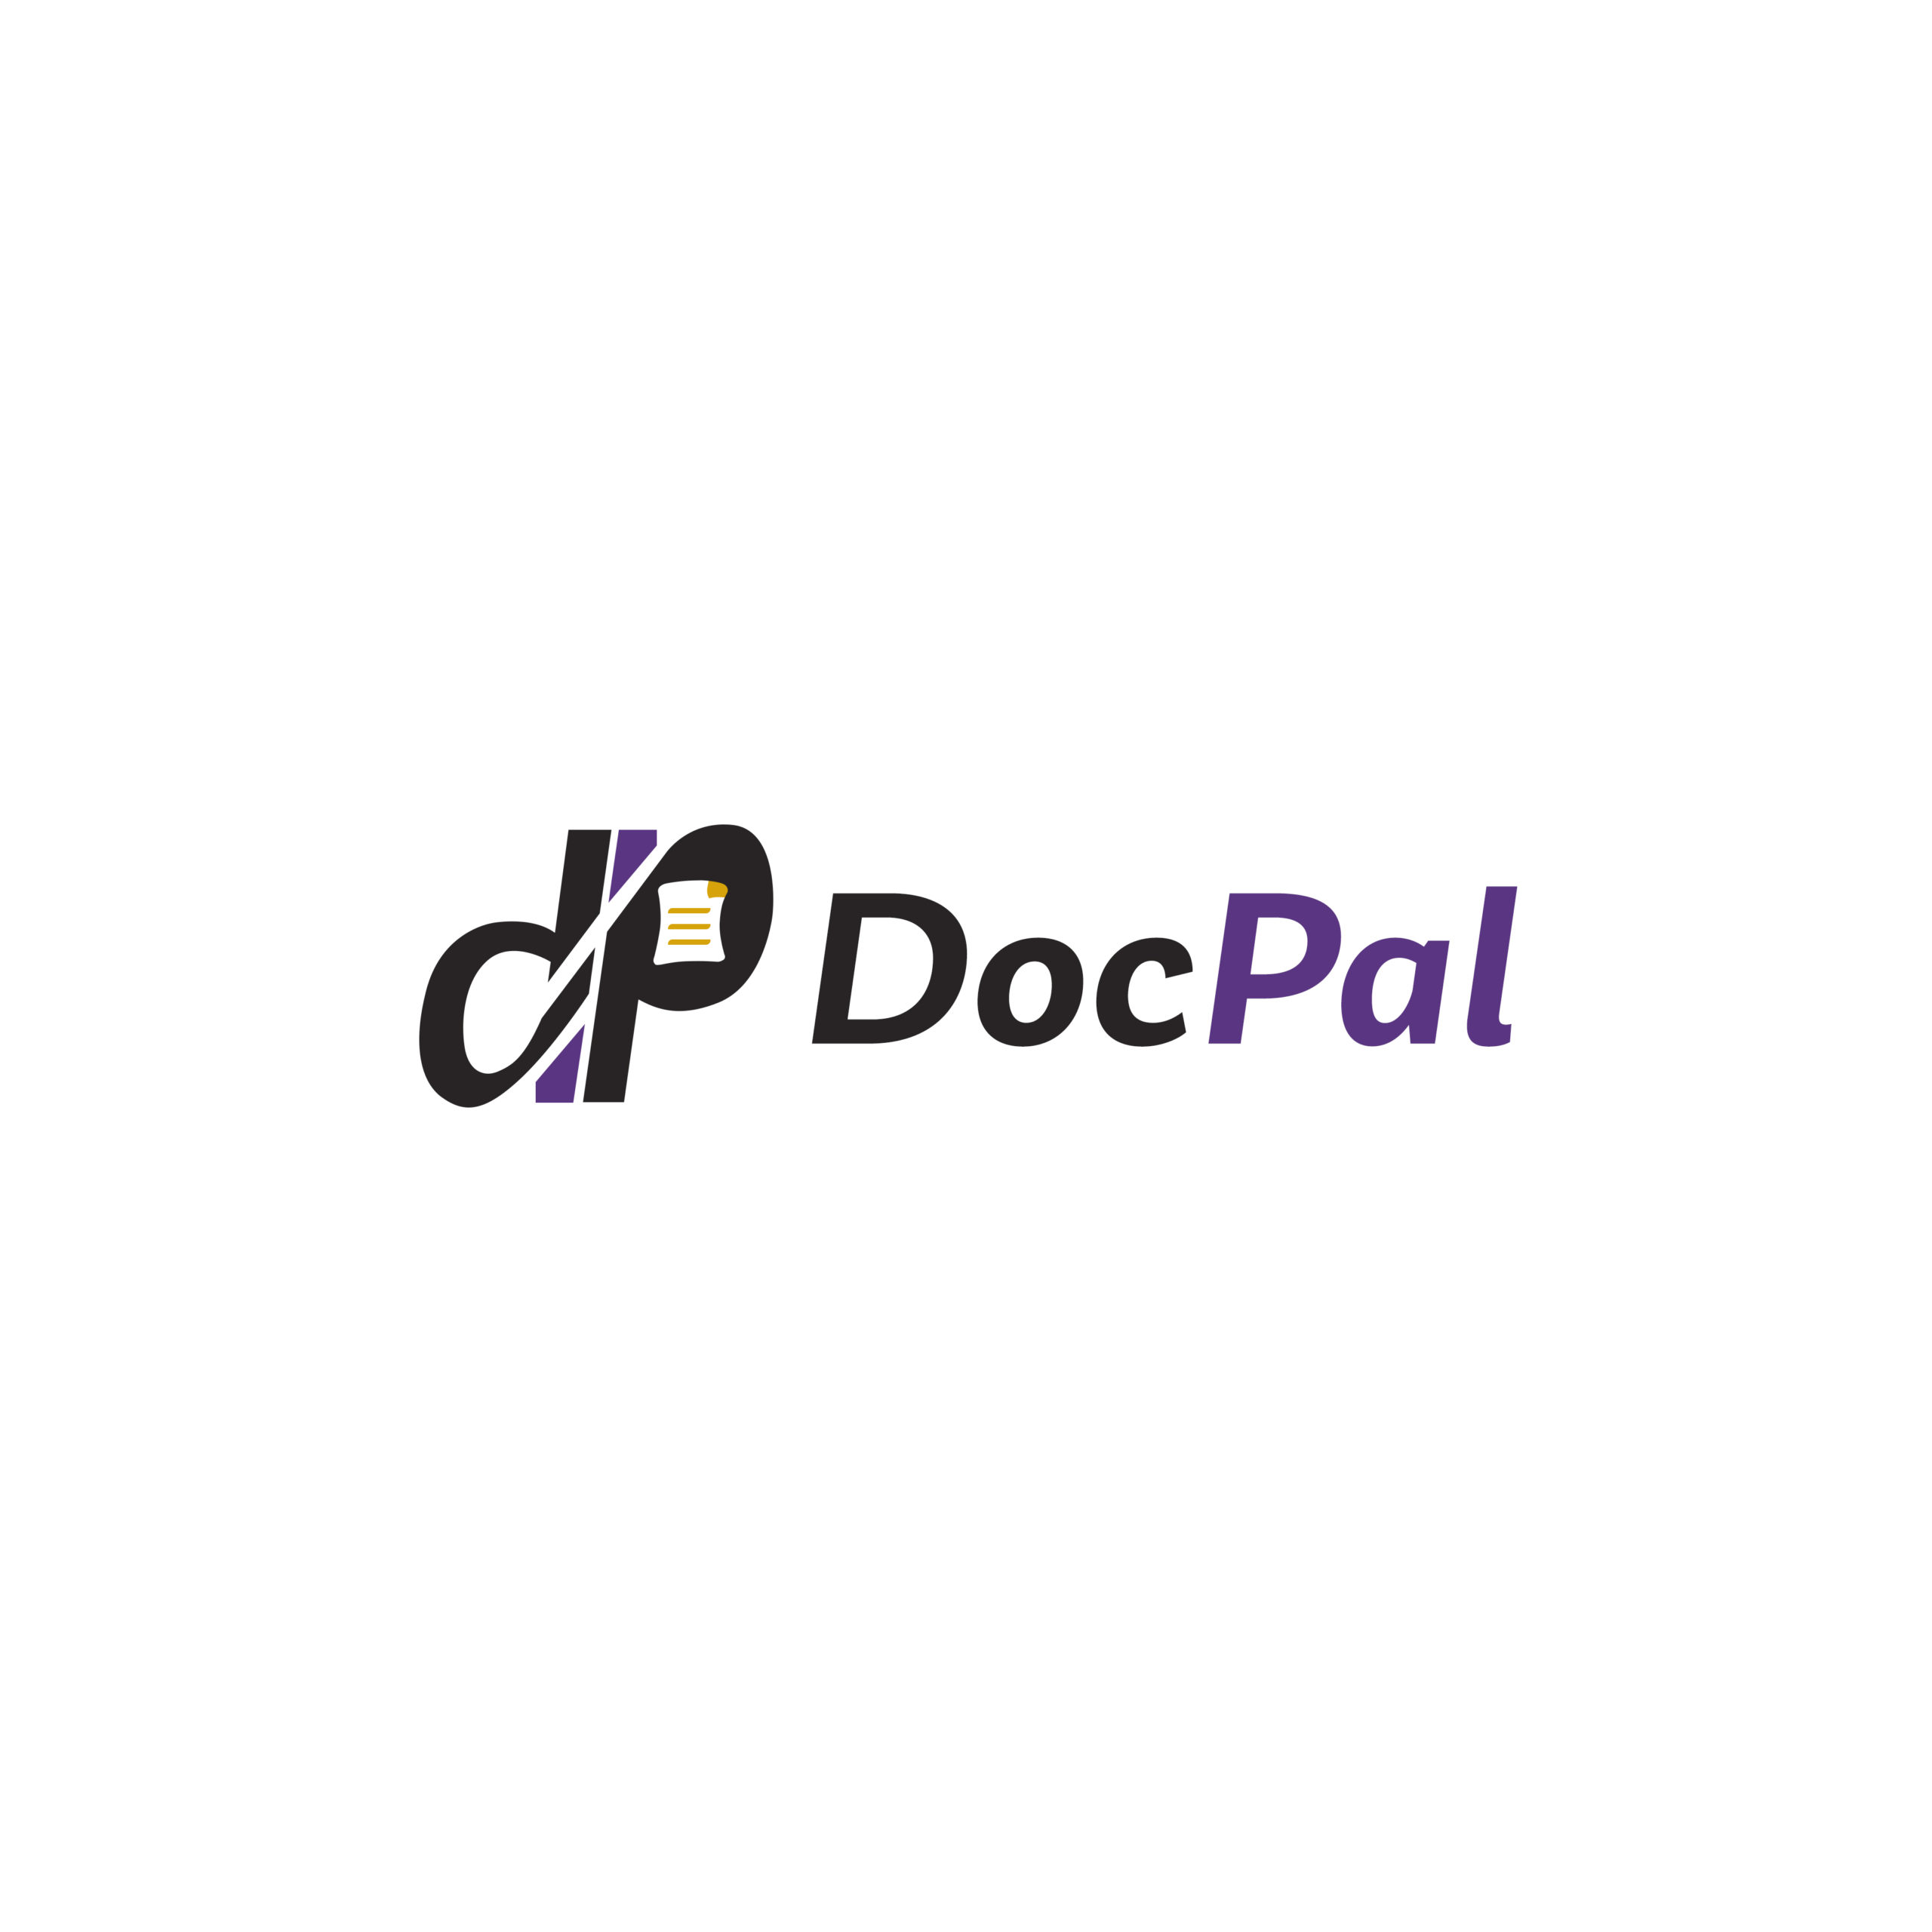 DocPal